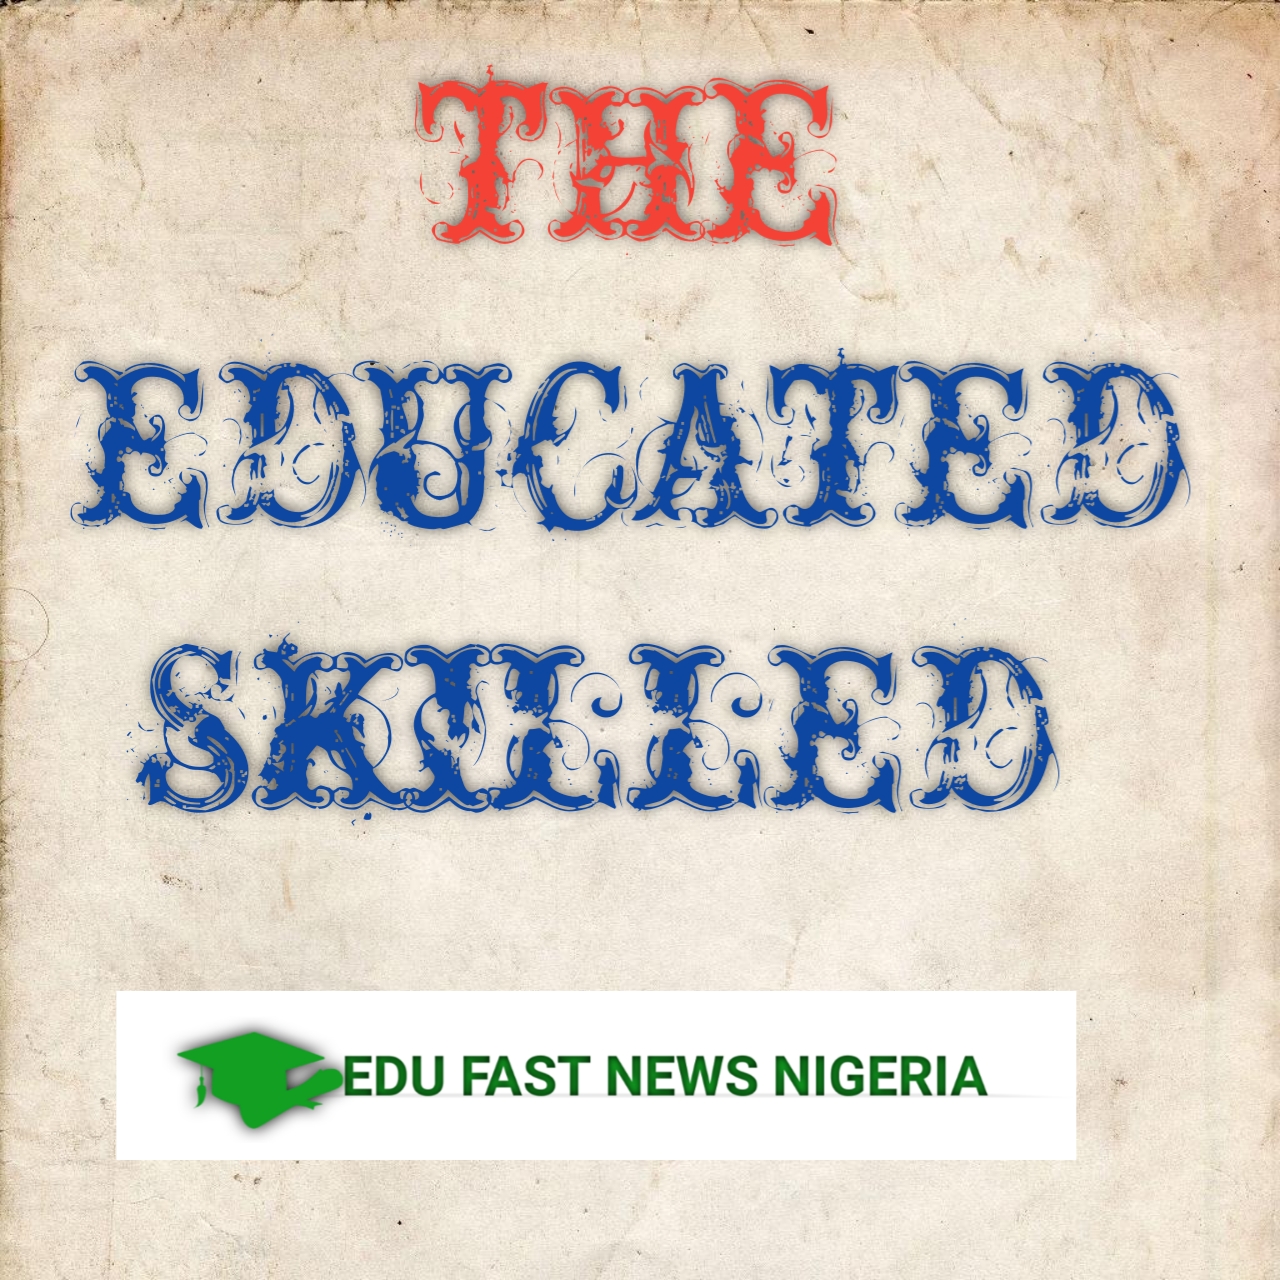 The Educated Skilled Episode 4